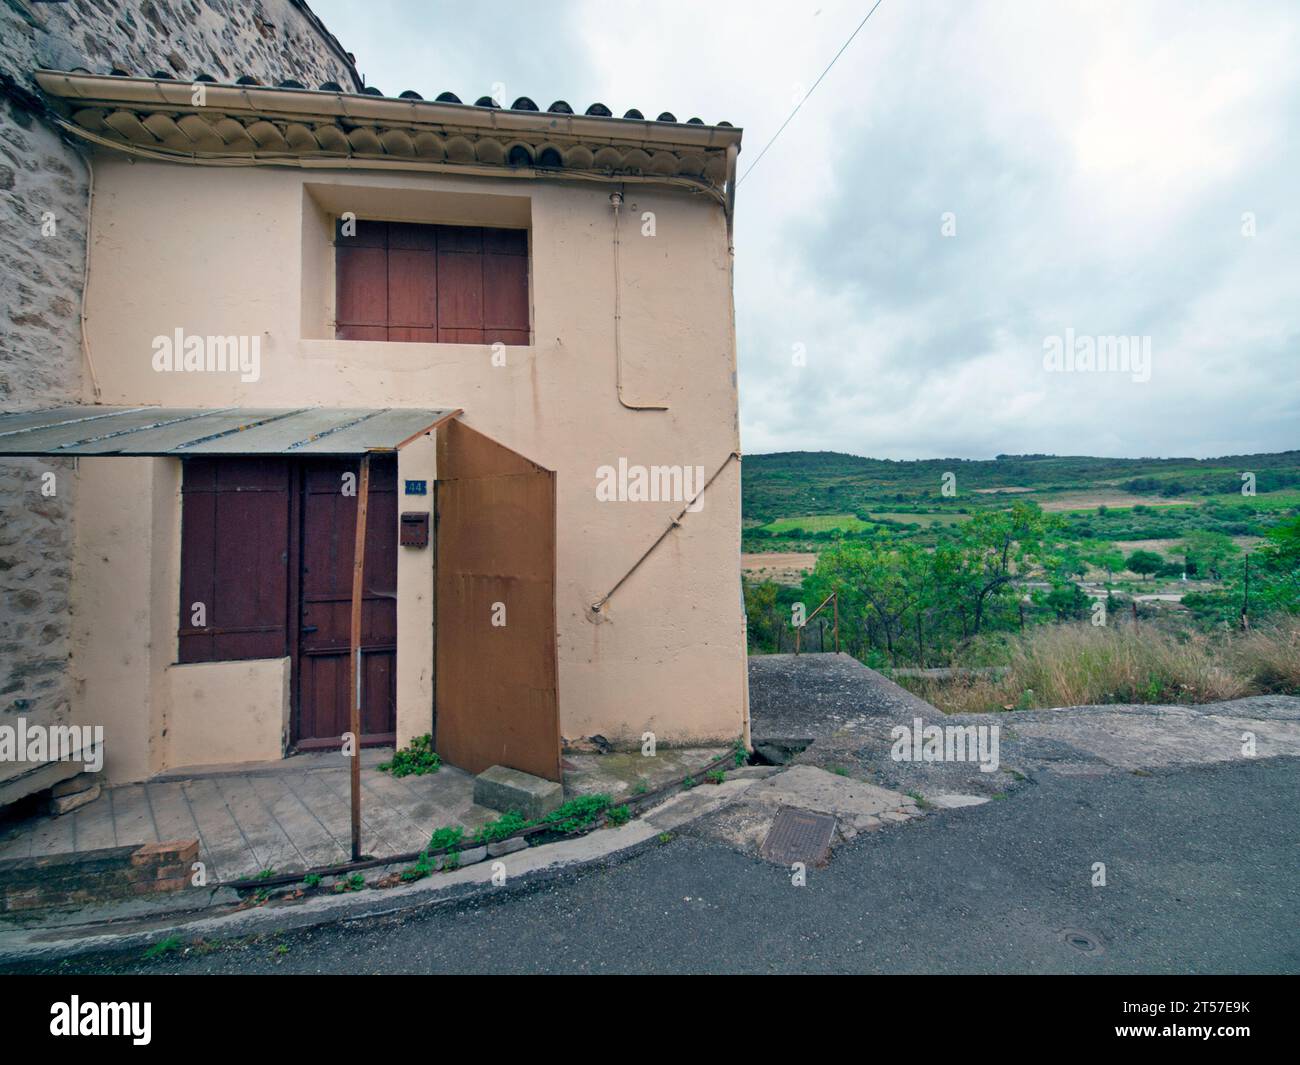 La Caunette, a small village in the Herault department of southern France Stock Photo